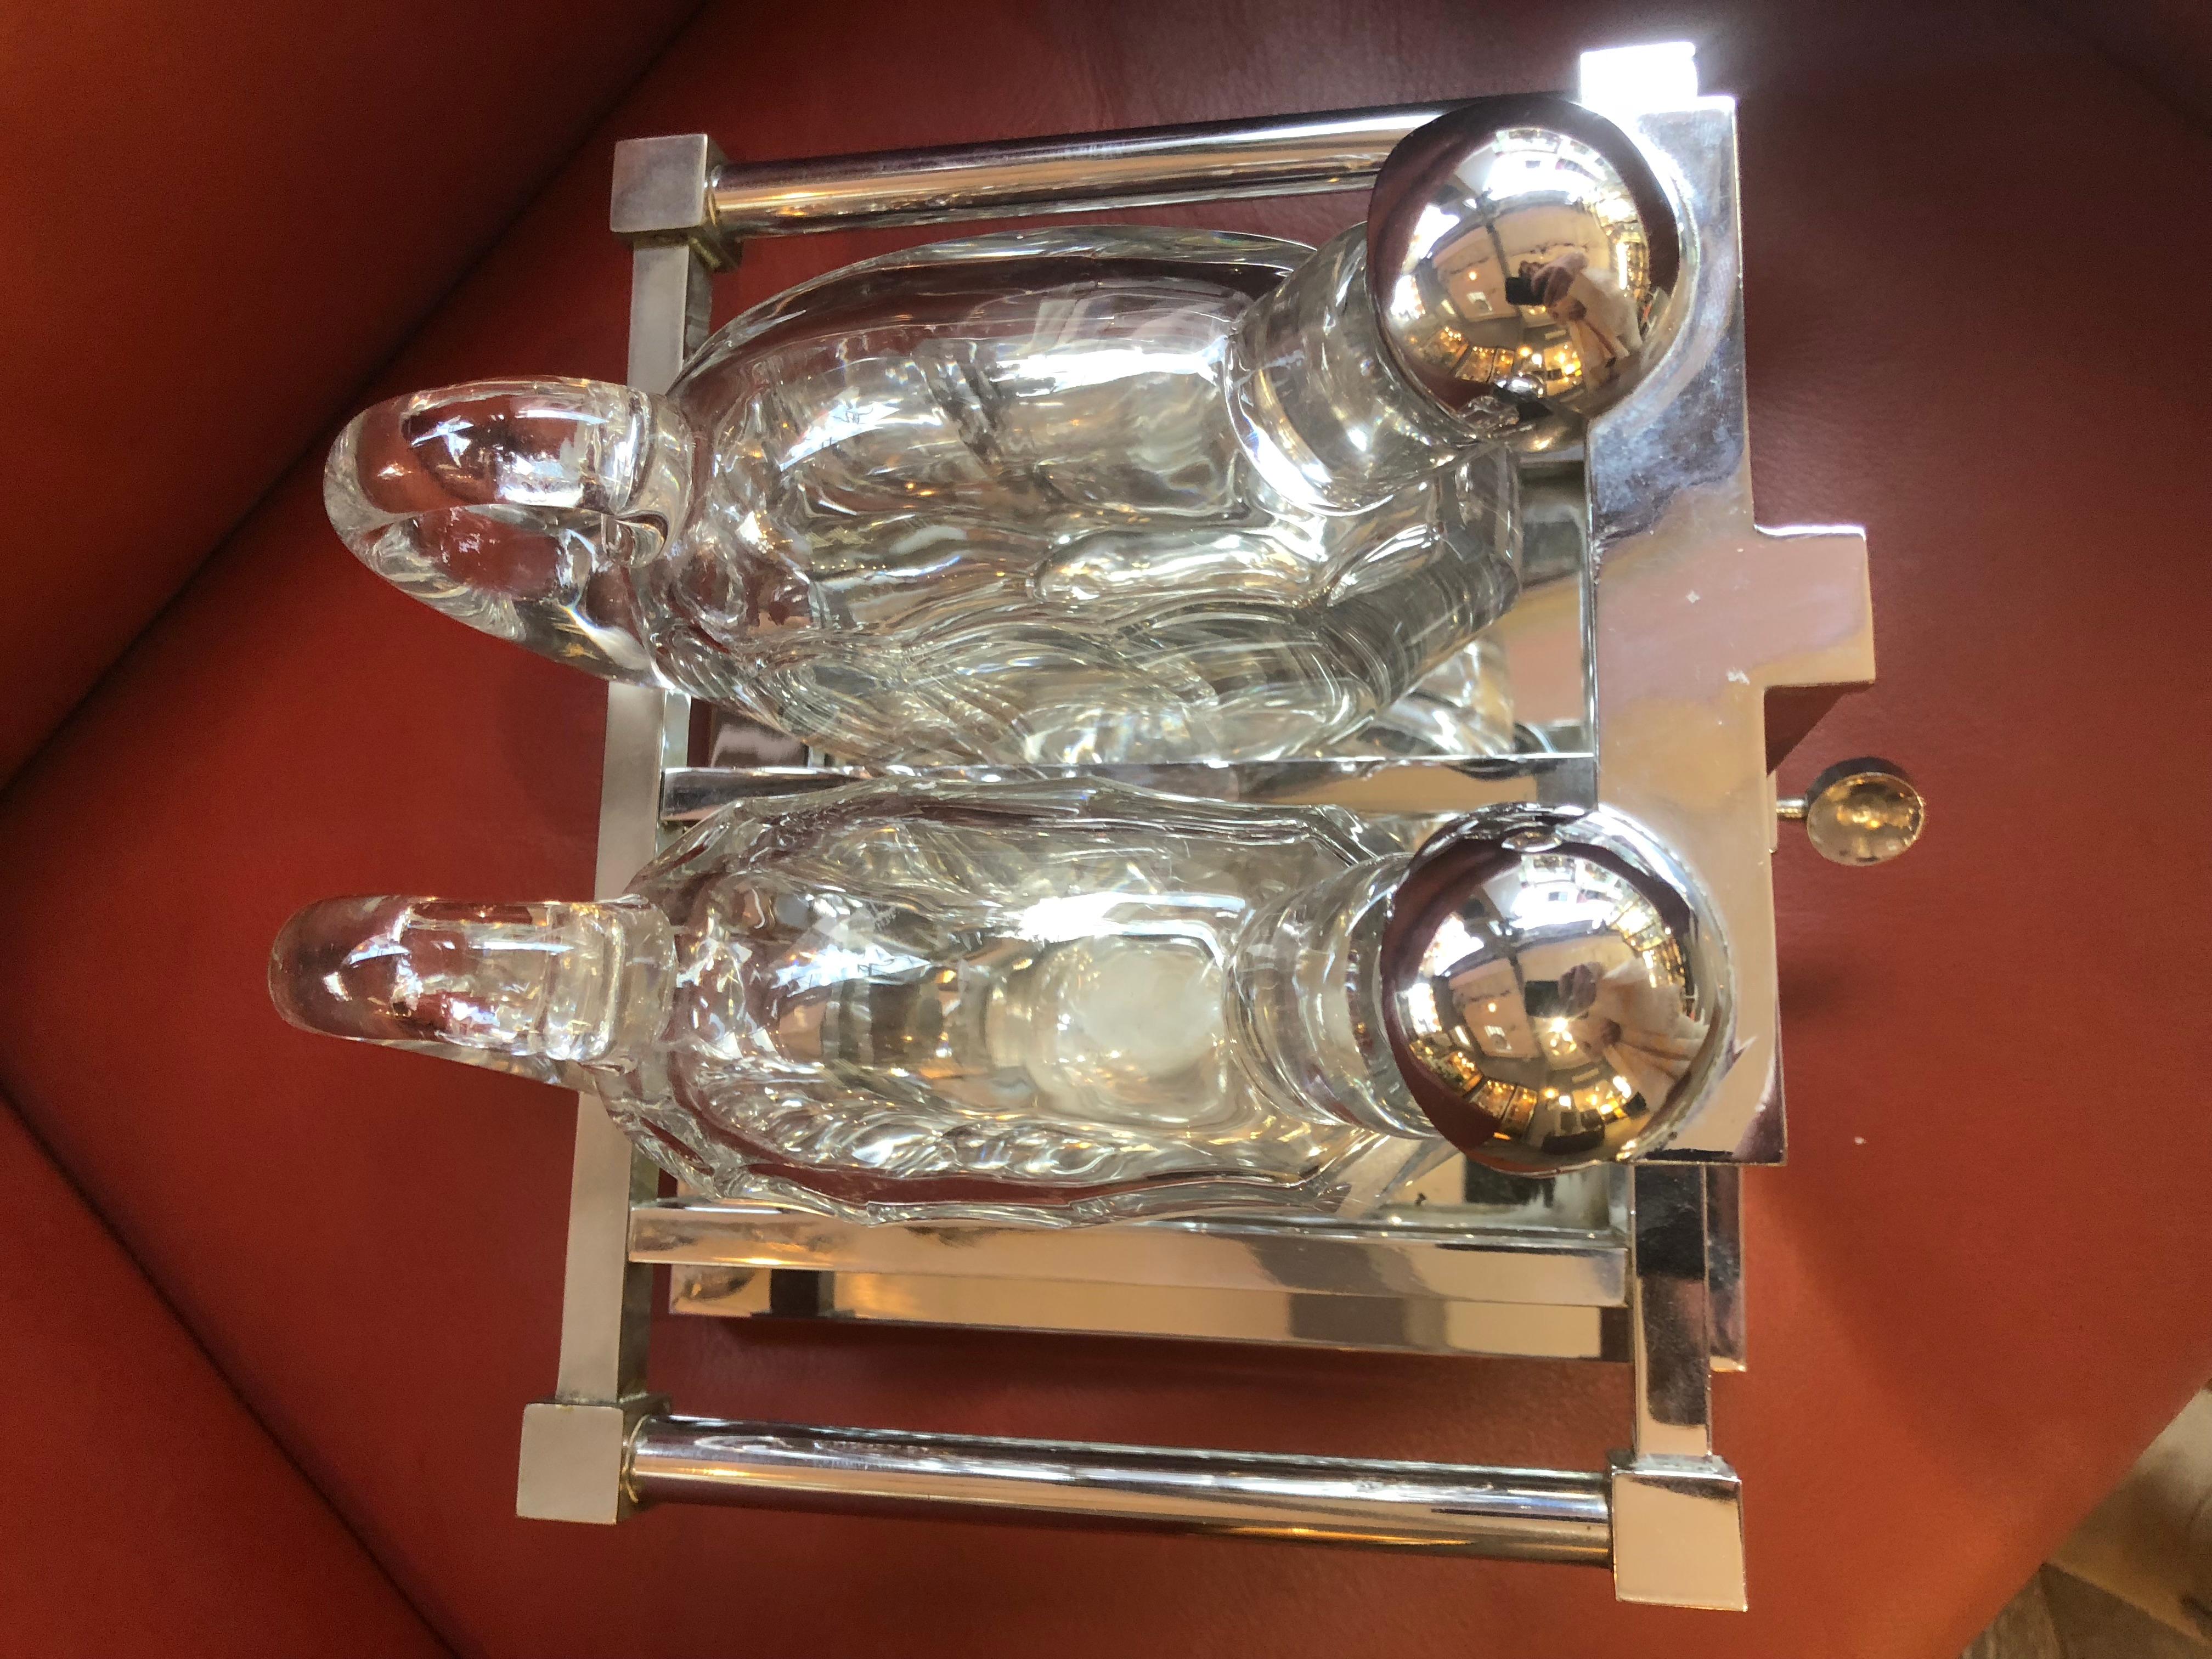 Liqueur cellar in chrome bronze with double rectangular trays decorated and presenting 2 flasks in Baccarat flat rumen crystal.
Cellar liqueur Jacques Adnet, modernist (1900-1984).
Geometric structure in chromed metal with 2 Baccarat crystal